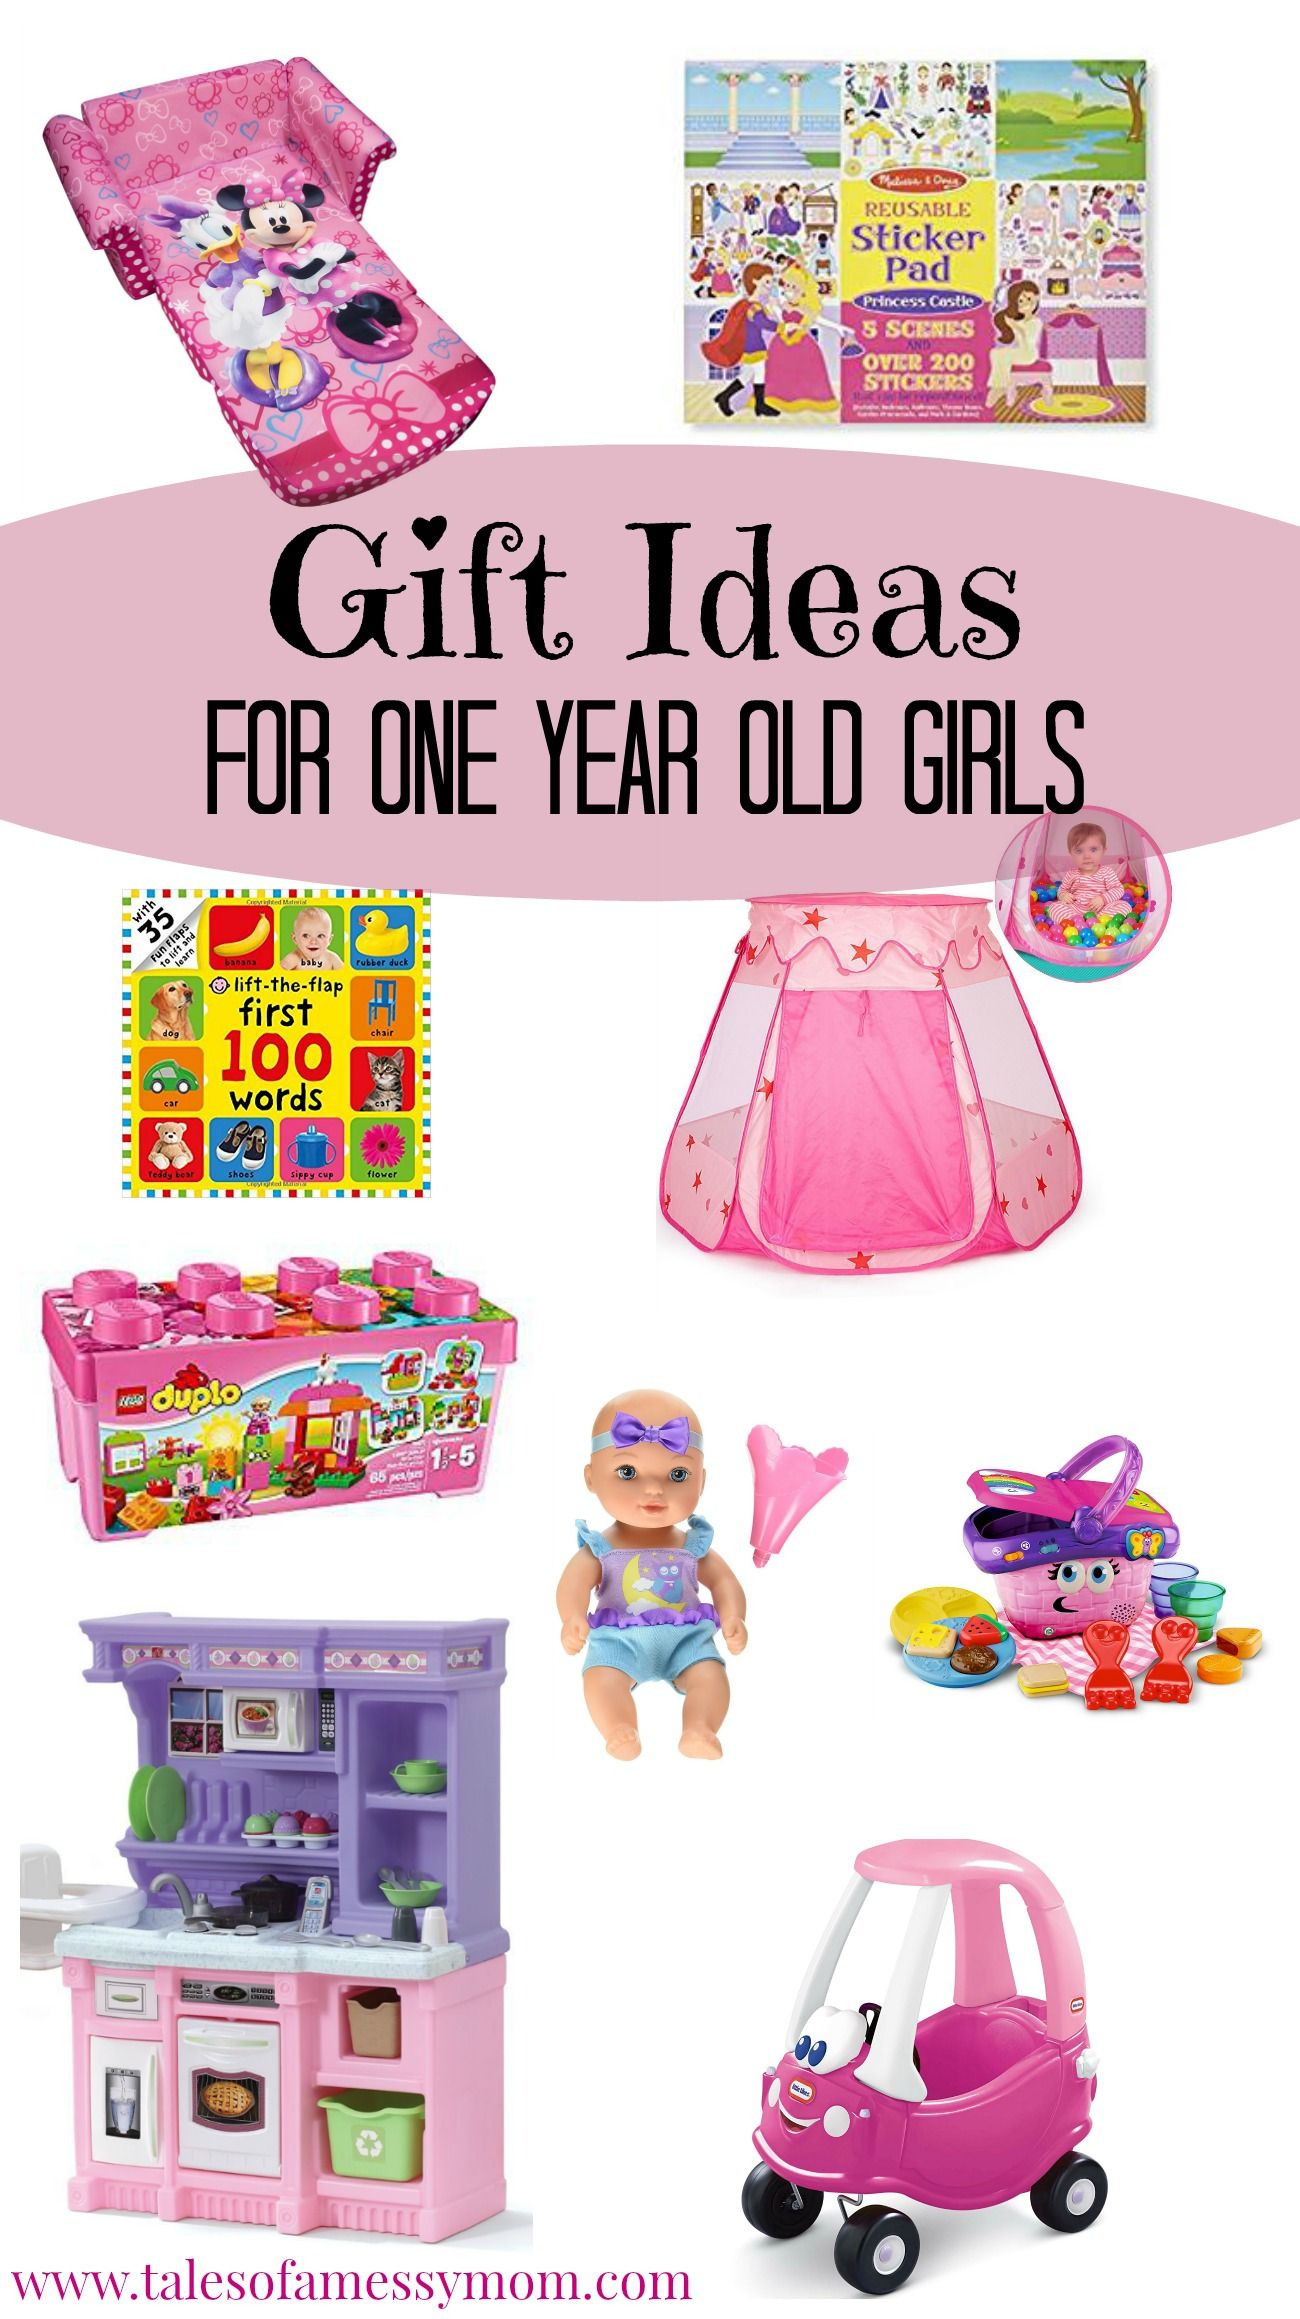 Birthday Gifts For 1 Year Old
 Gift Ideas for e Year Old Girls